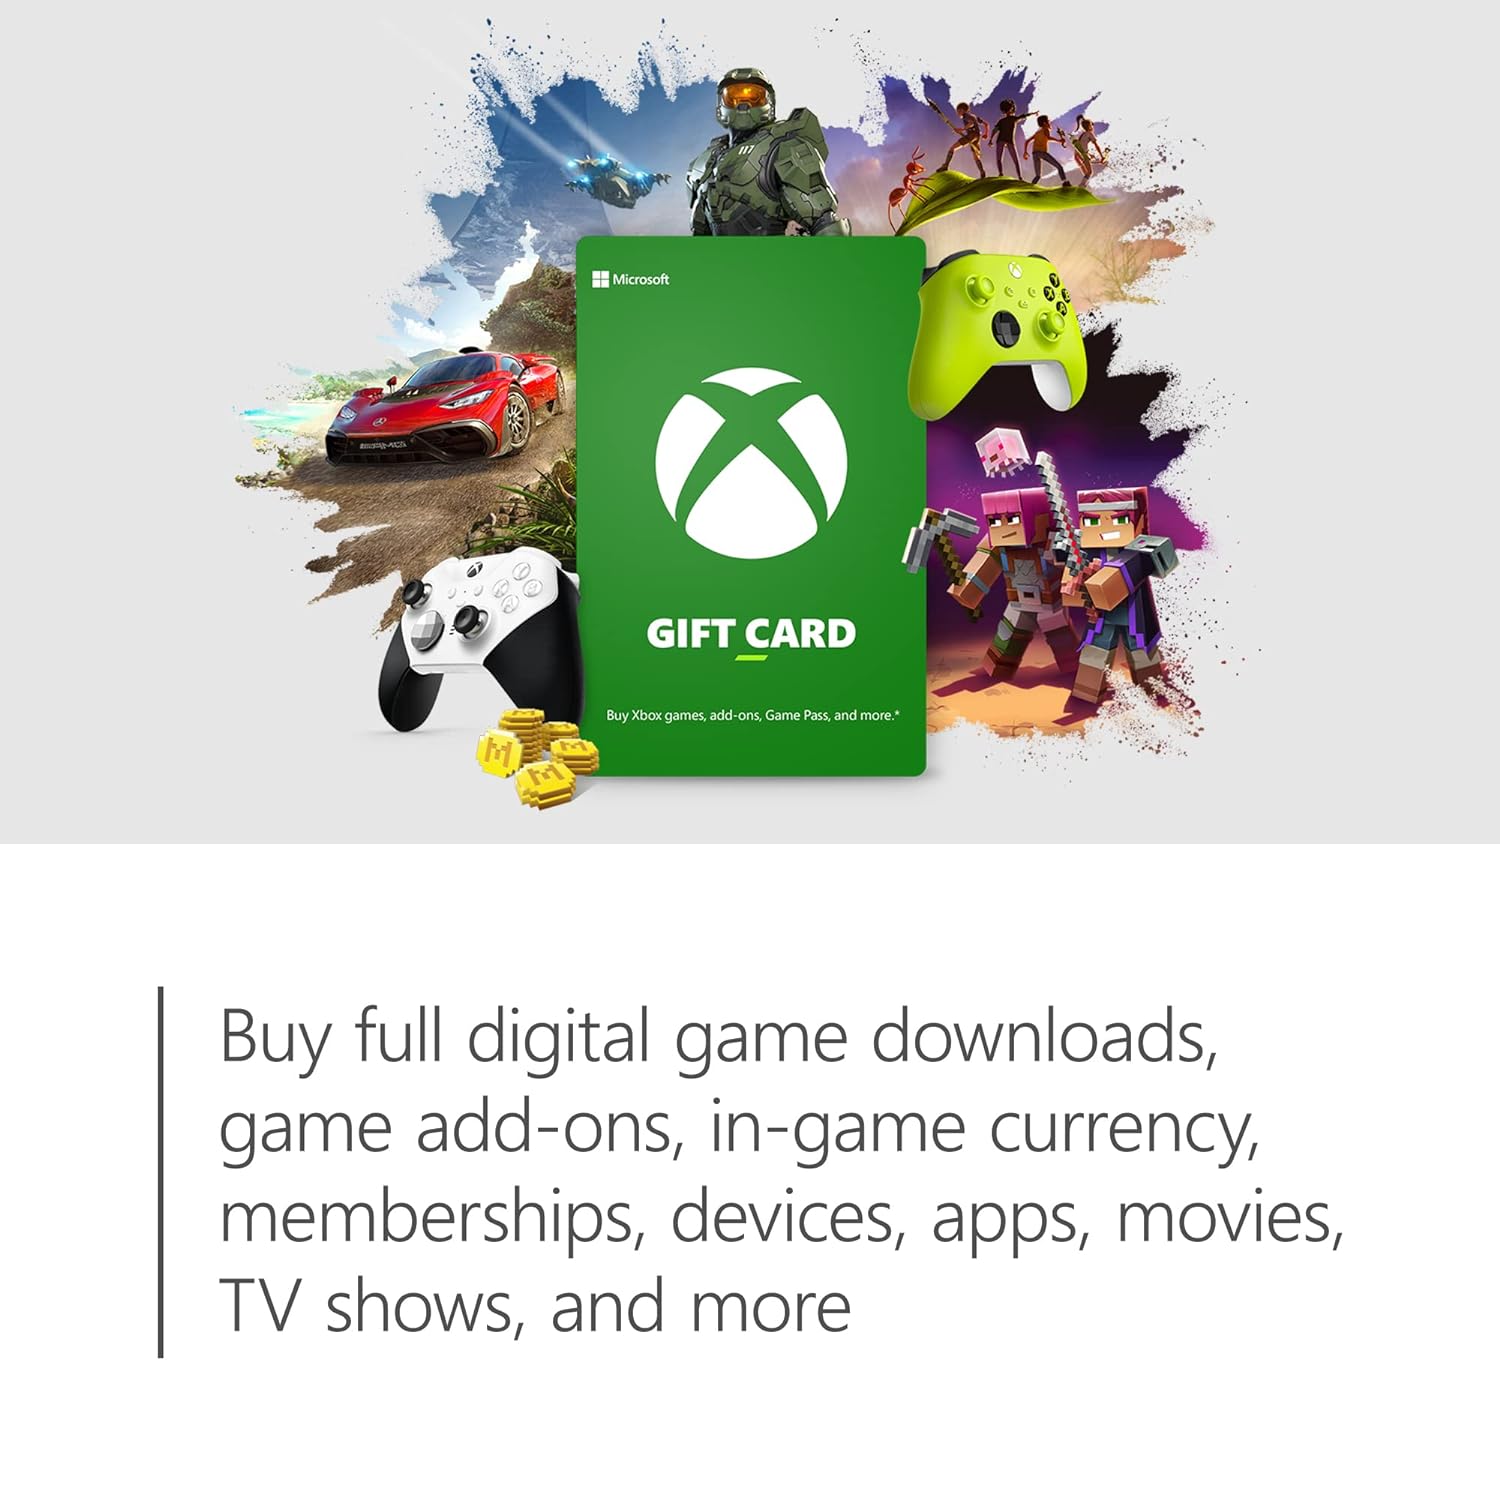 $15 Xbox Digital Gift Card | Buy full digital game downloads, game add-ons, in-game currrency, memberships, devices, apps, movies, TV shows, and more.